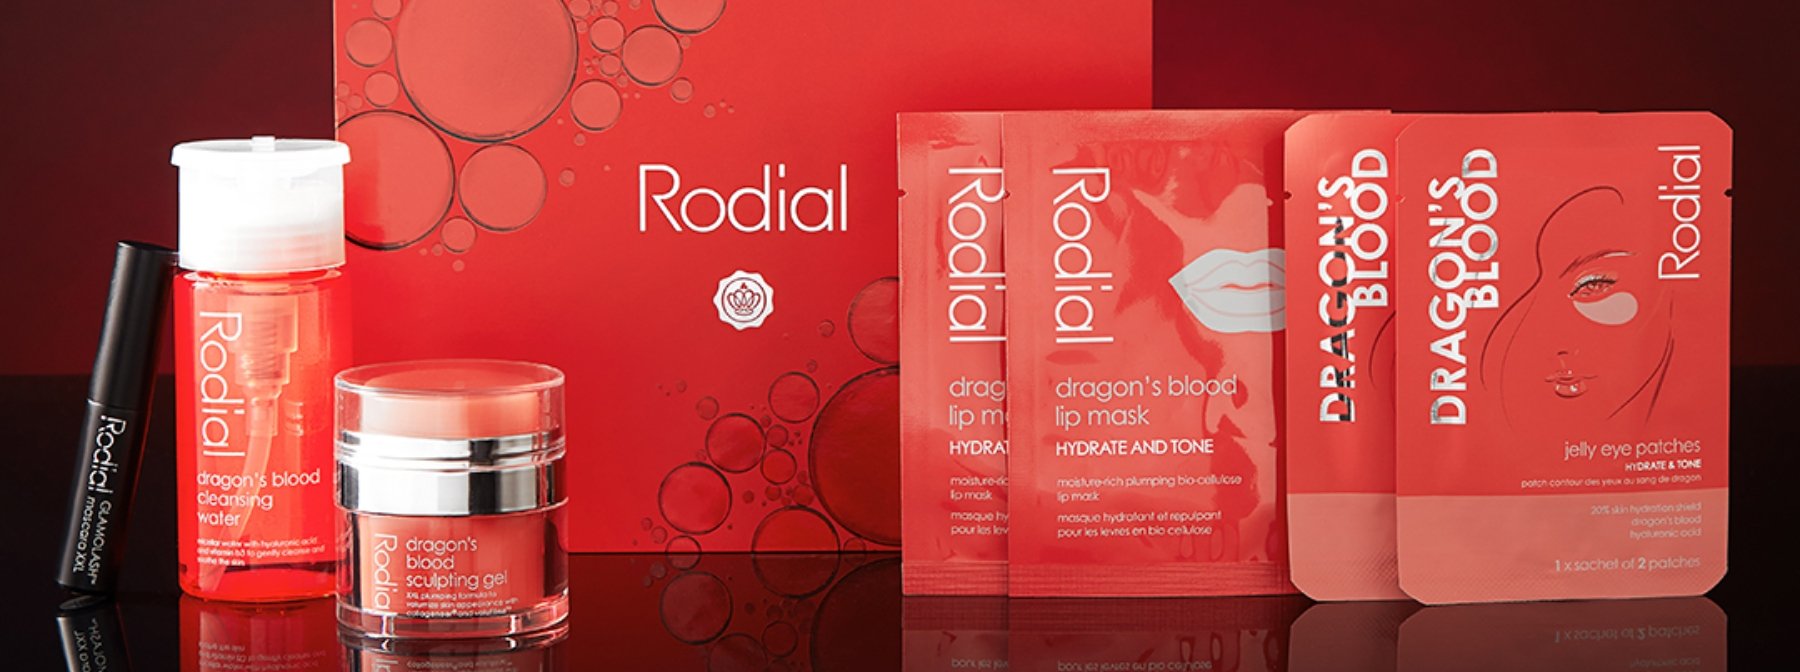 Our Rodial Dragon’s Blood GLOSSYBOX